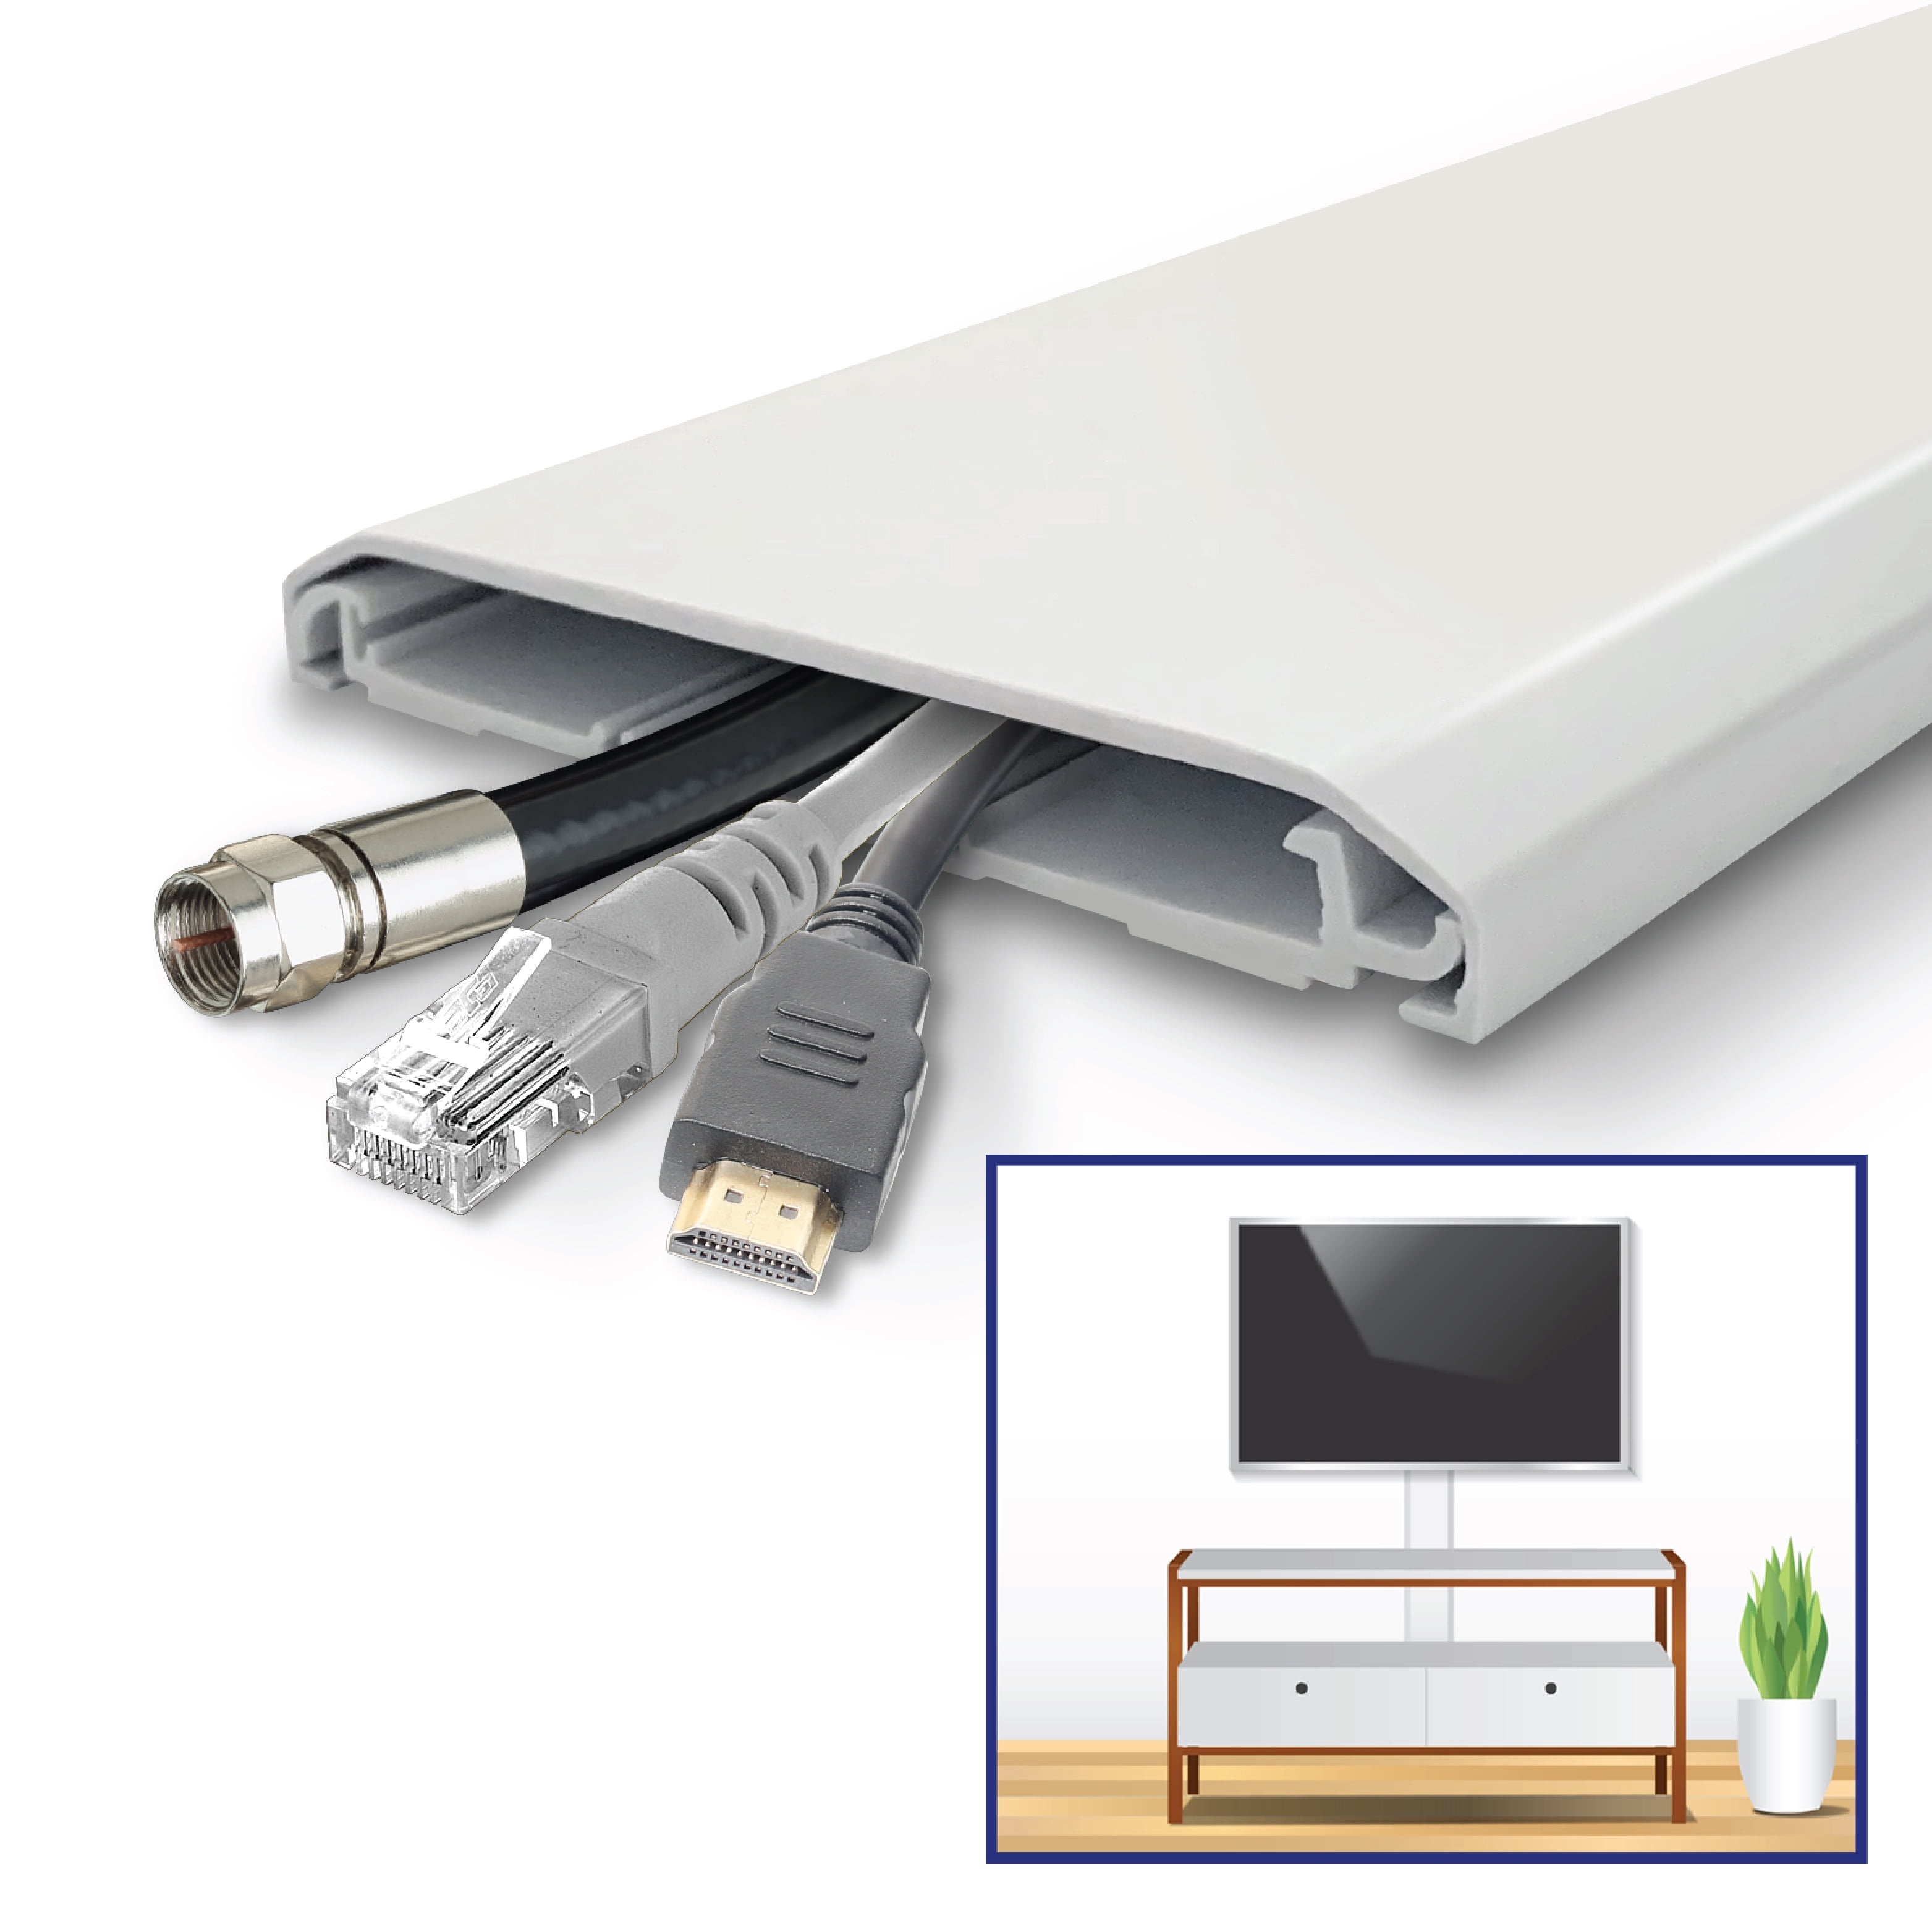 Sanus On-Wall Cable Concealer Kit for Mounted TVs - White - 1 Each